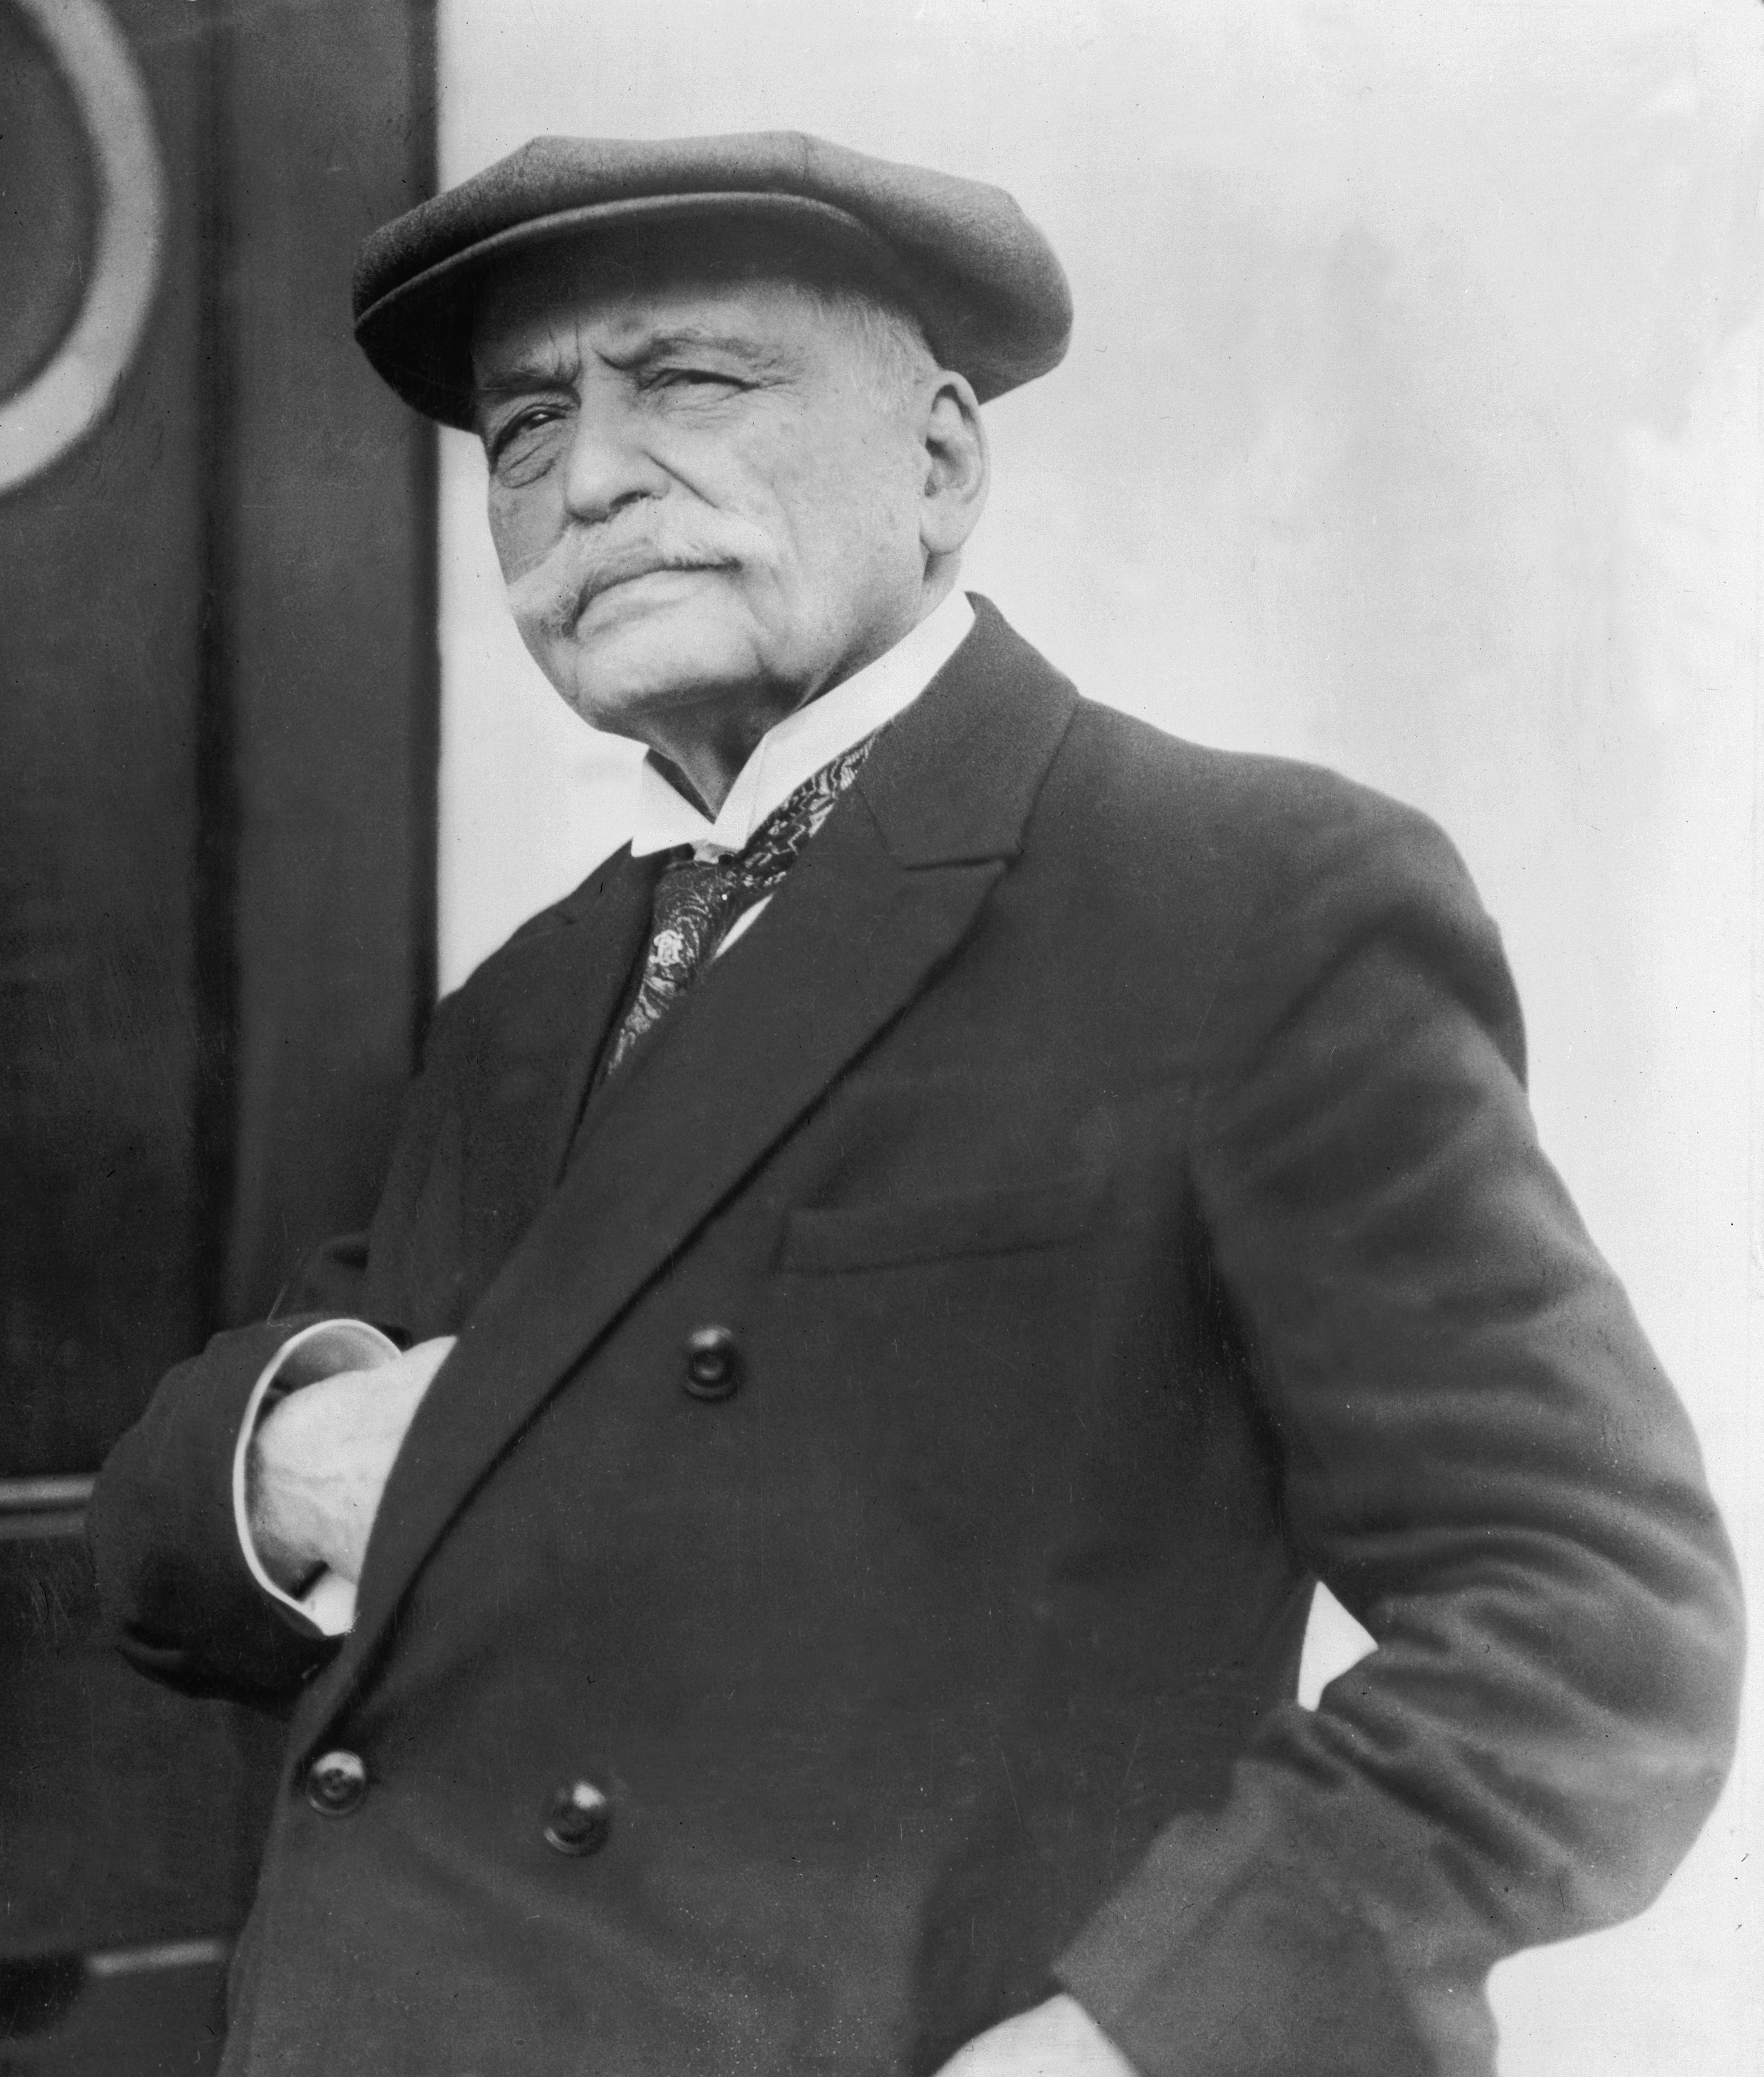 Chef Auguste Escoffier, who invented the French kitchen brigade, pictured circa 1915